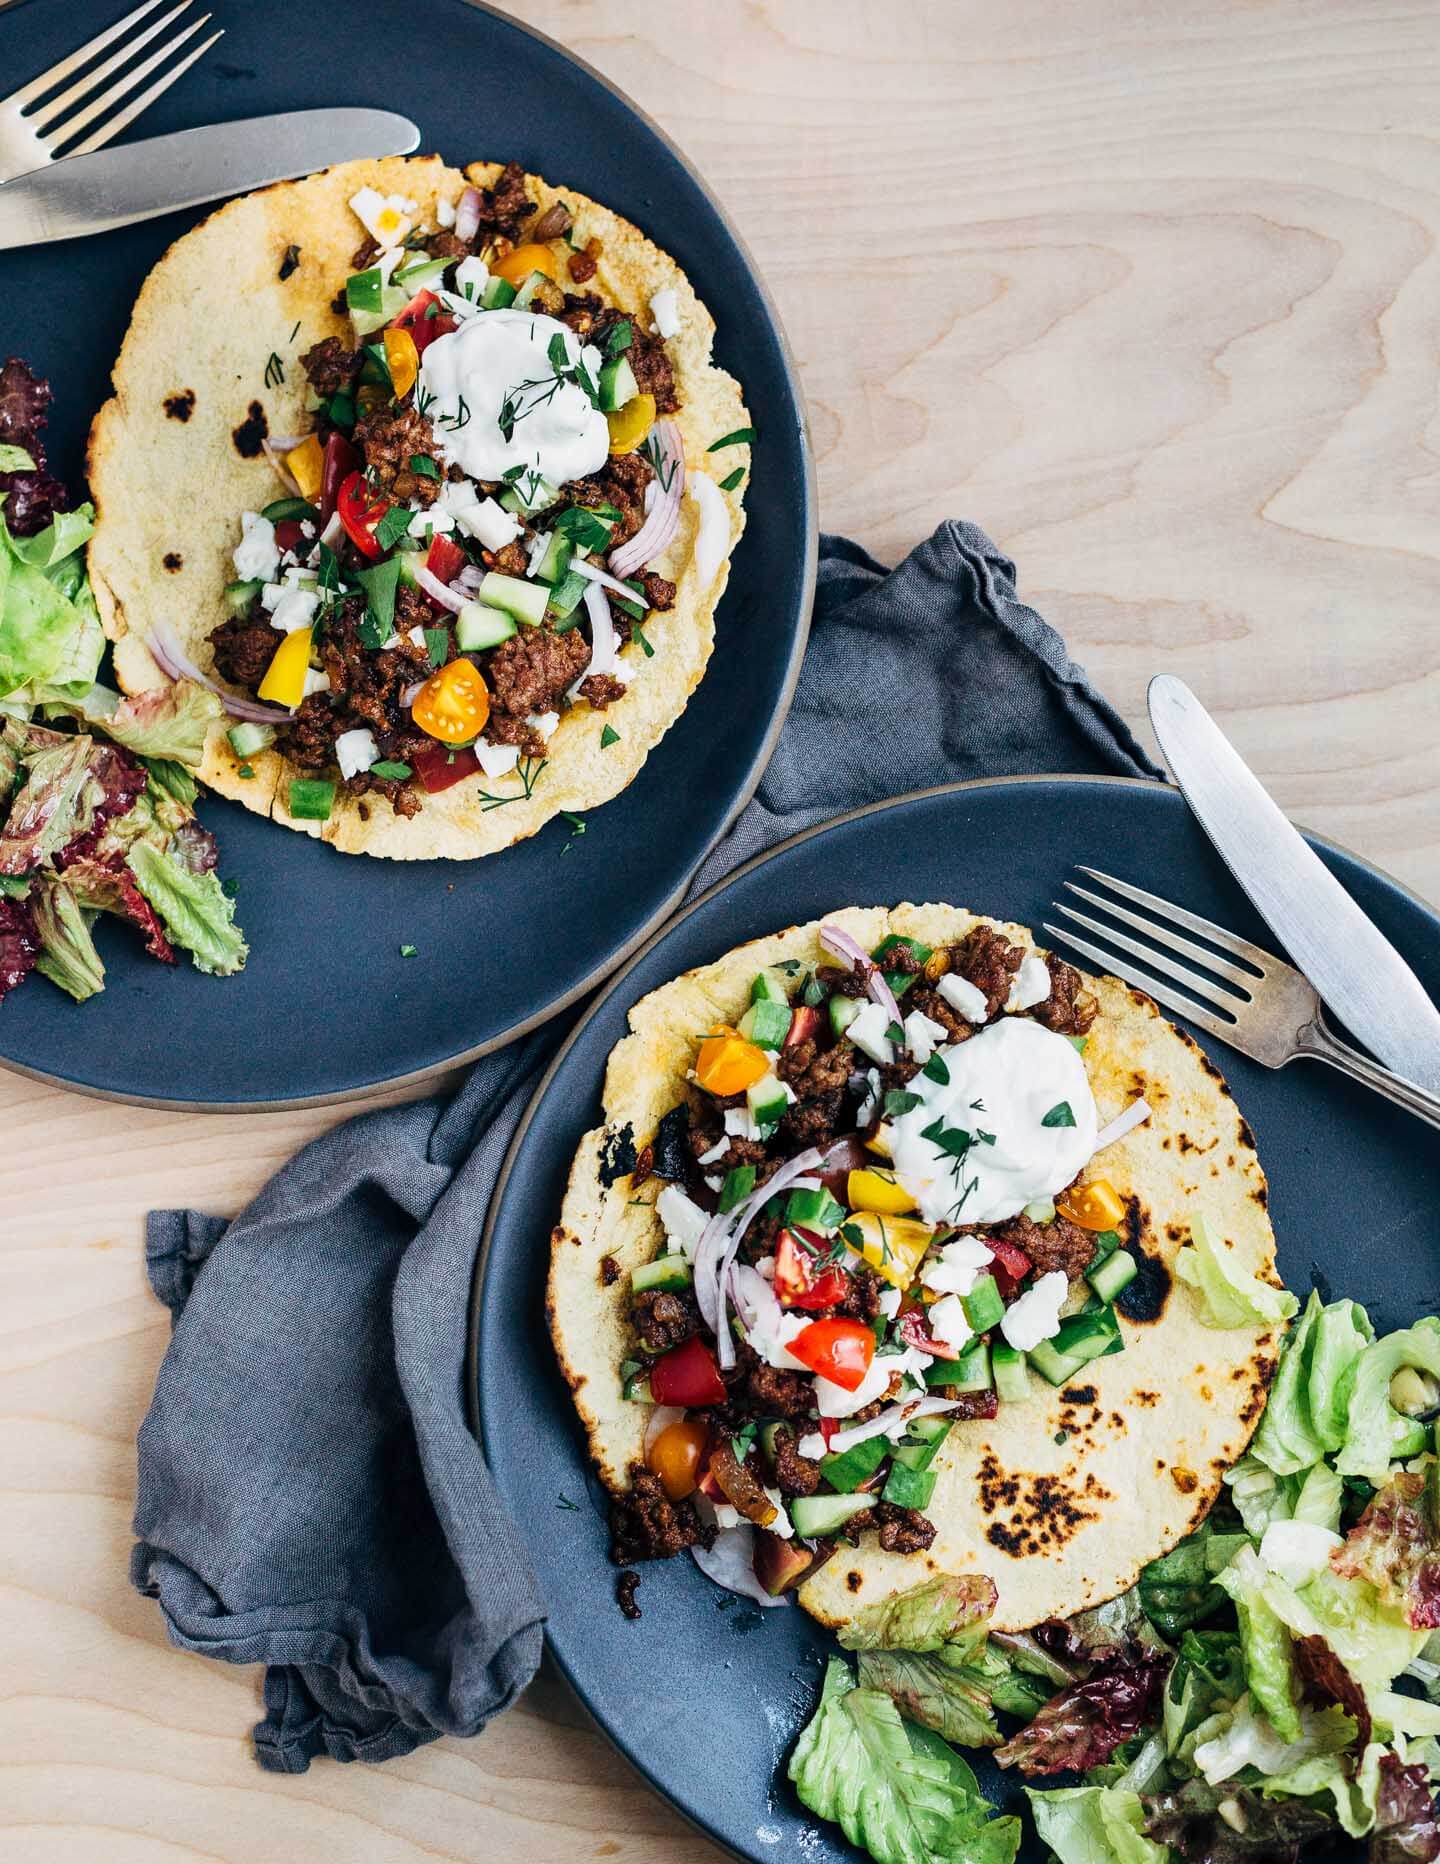 Greek-inspired lamb tacos are a revelation. They're proof that a great dinner can be as simple as sautéing meat with alliums and spices, and chopping up a few vegetables. Add a side salad and maybe some rice, and you have a simple dinner that's ready in under 30 minutes.